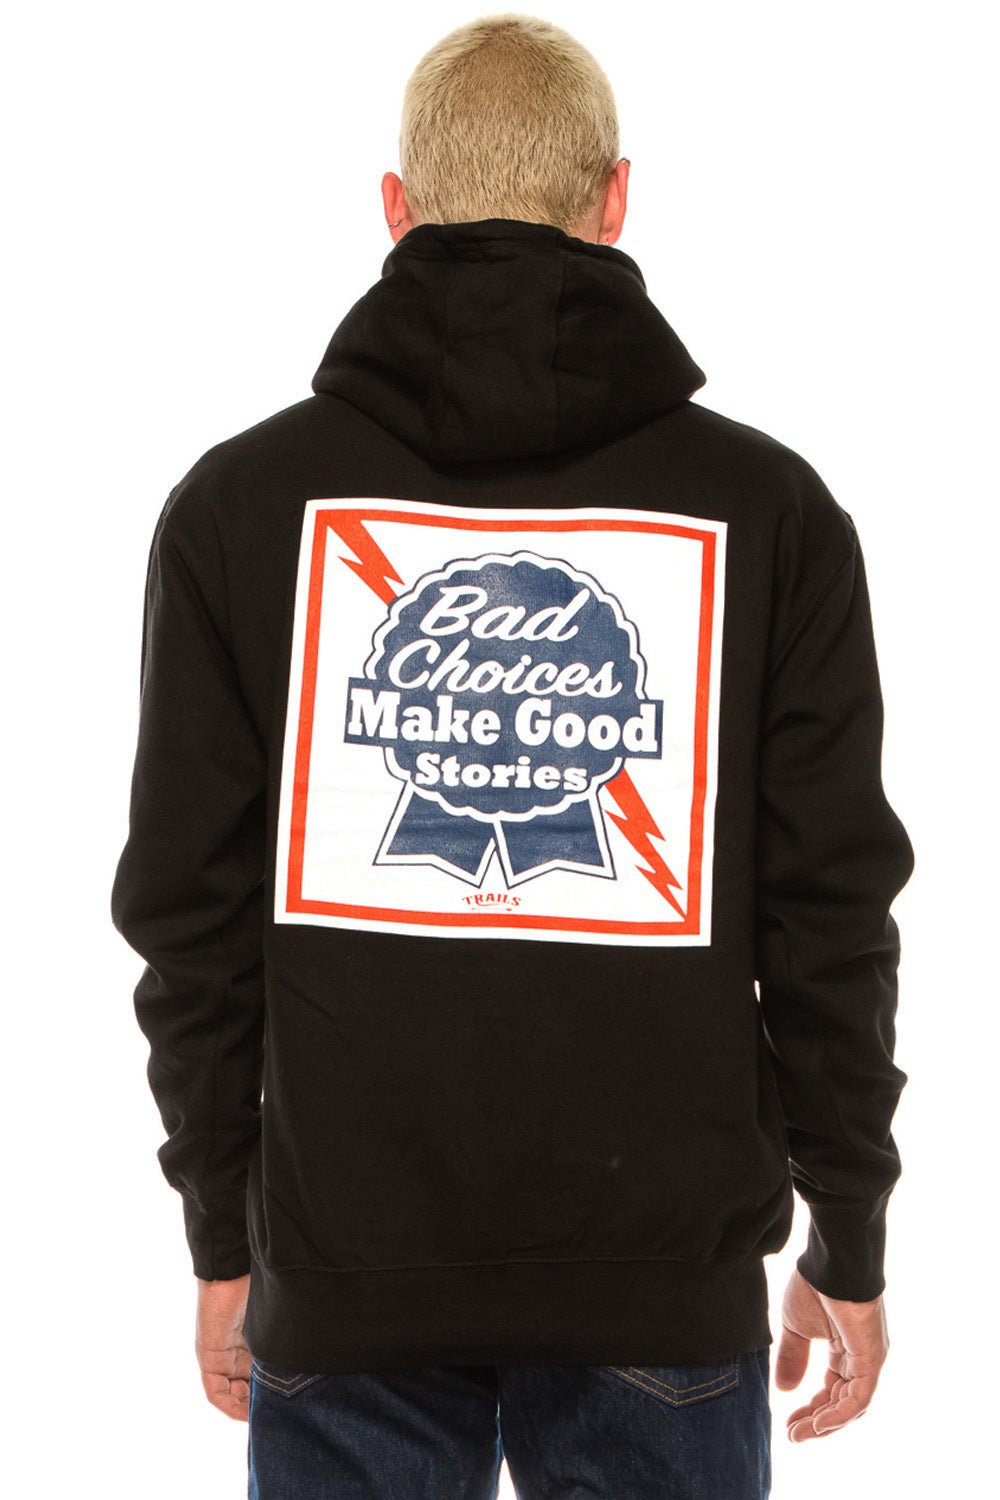 BAD CHOICES MAKE GOOD STORIES HOODIE - Trailsclothing.com